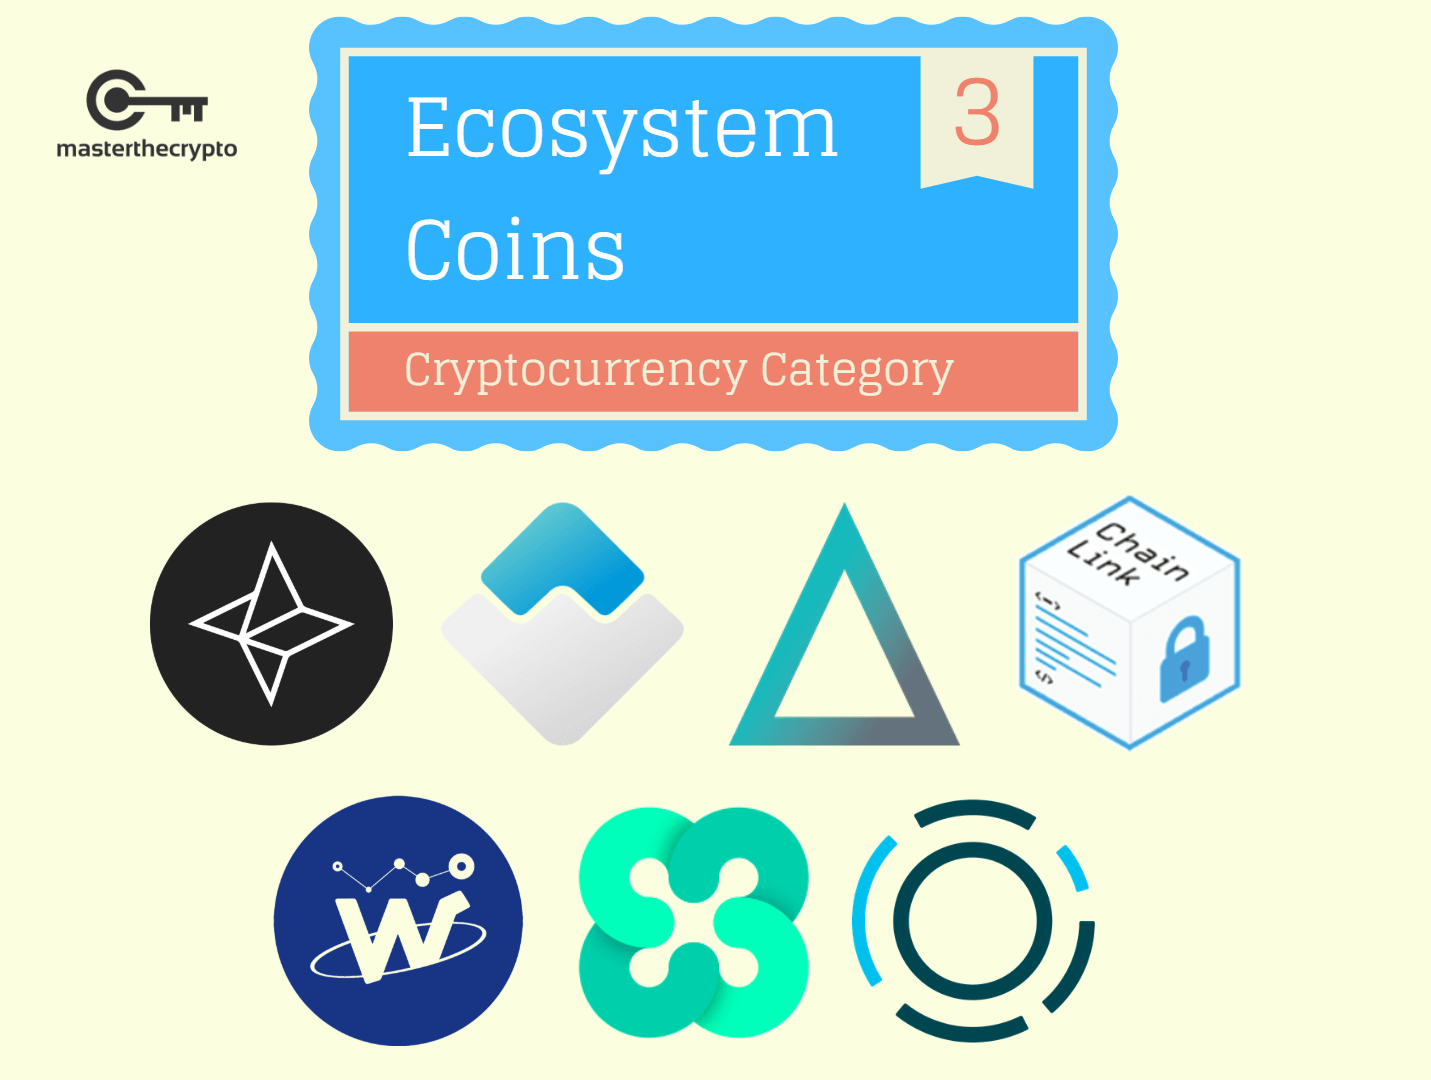 ecosystem, ecosystem coins, third category, coins, category